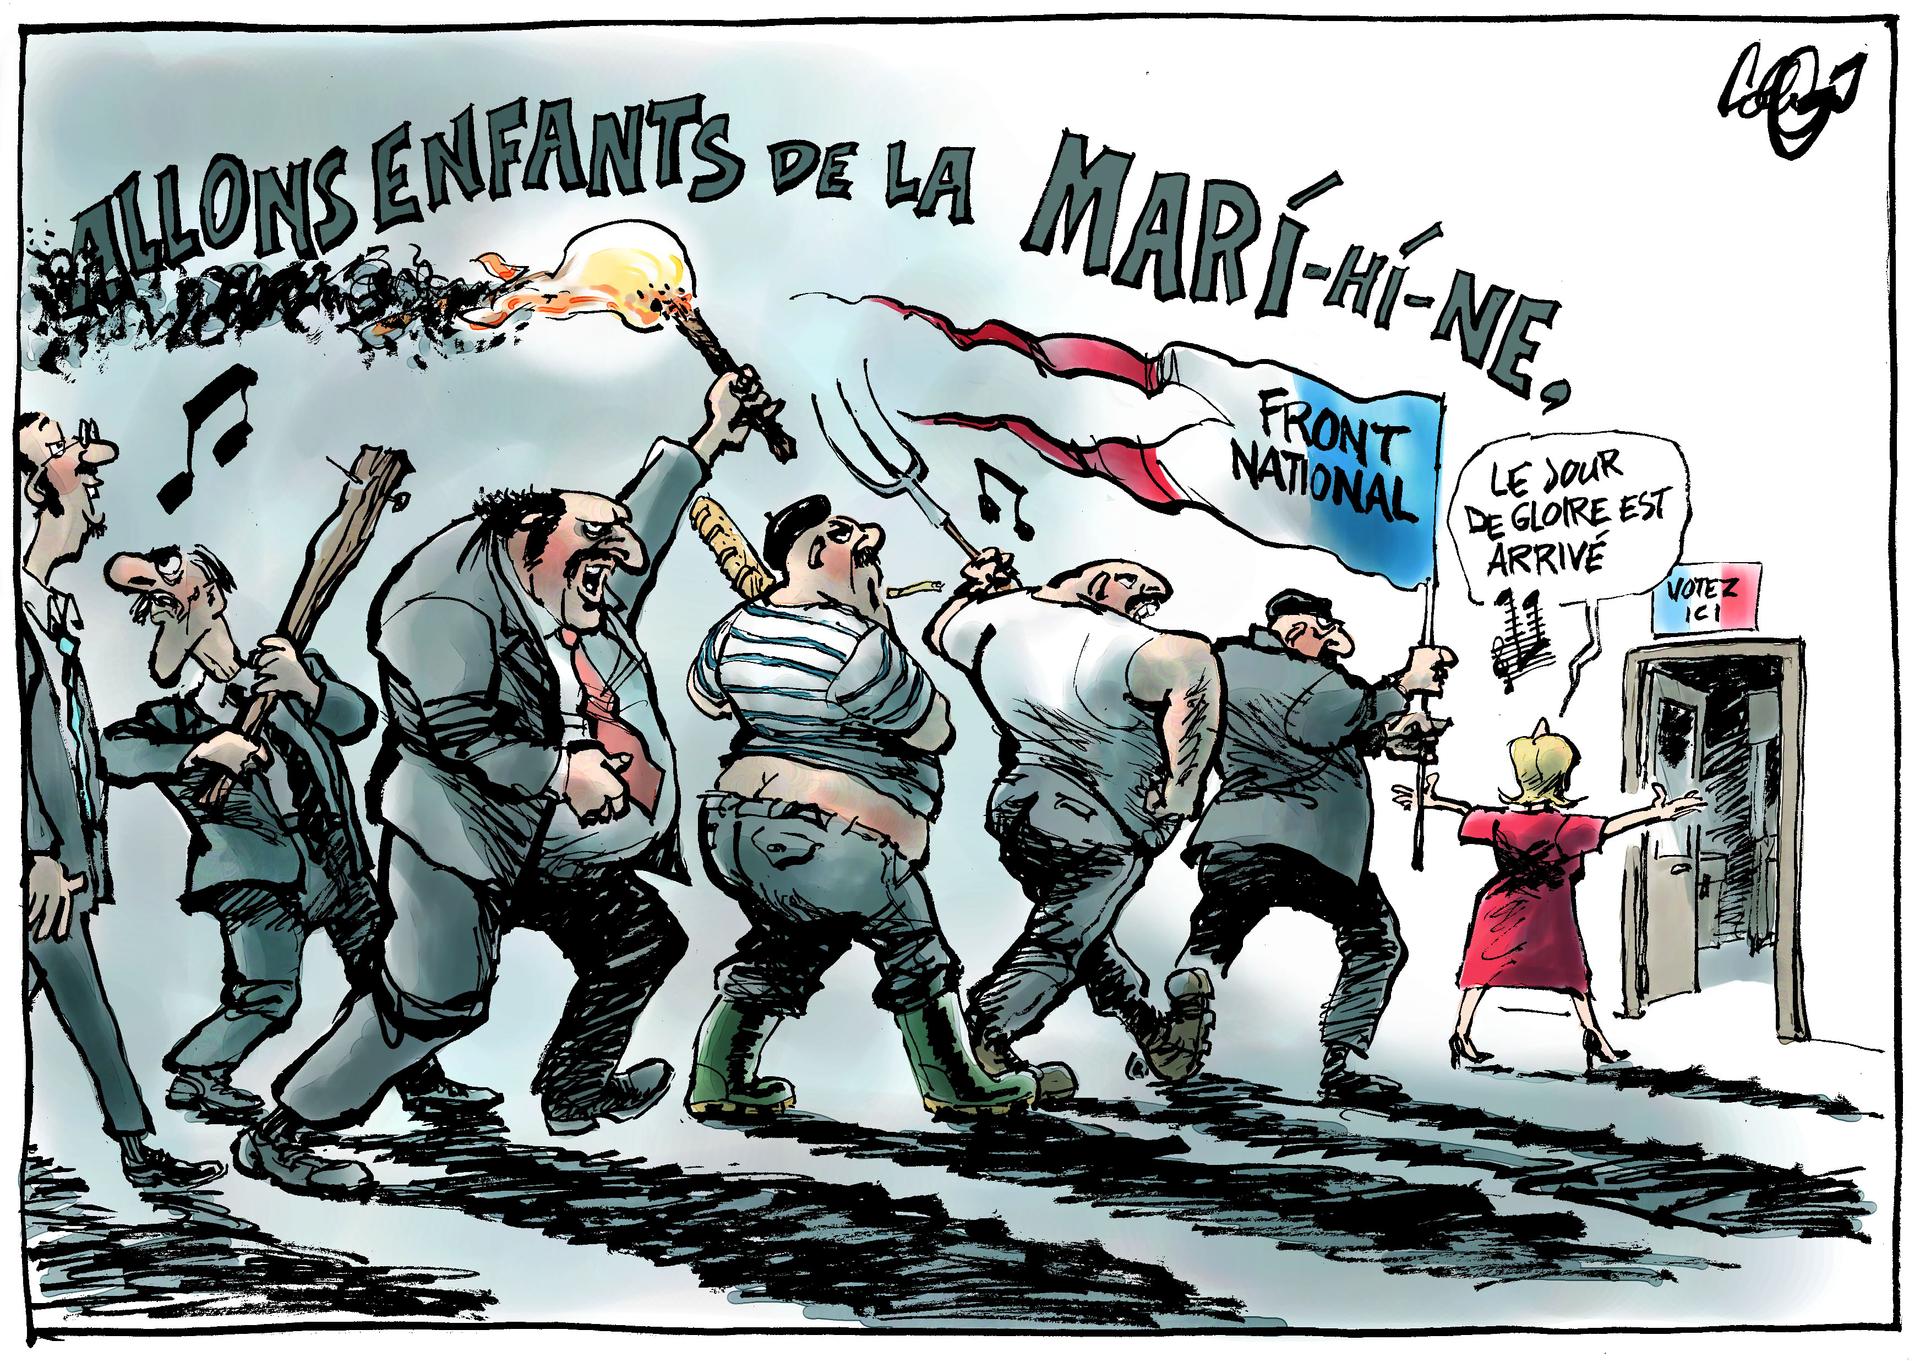 cartoon showing LePen fans chasing after her